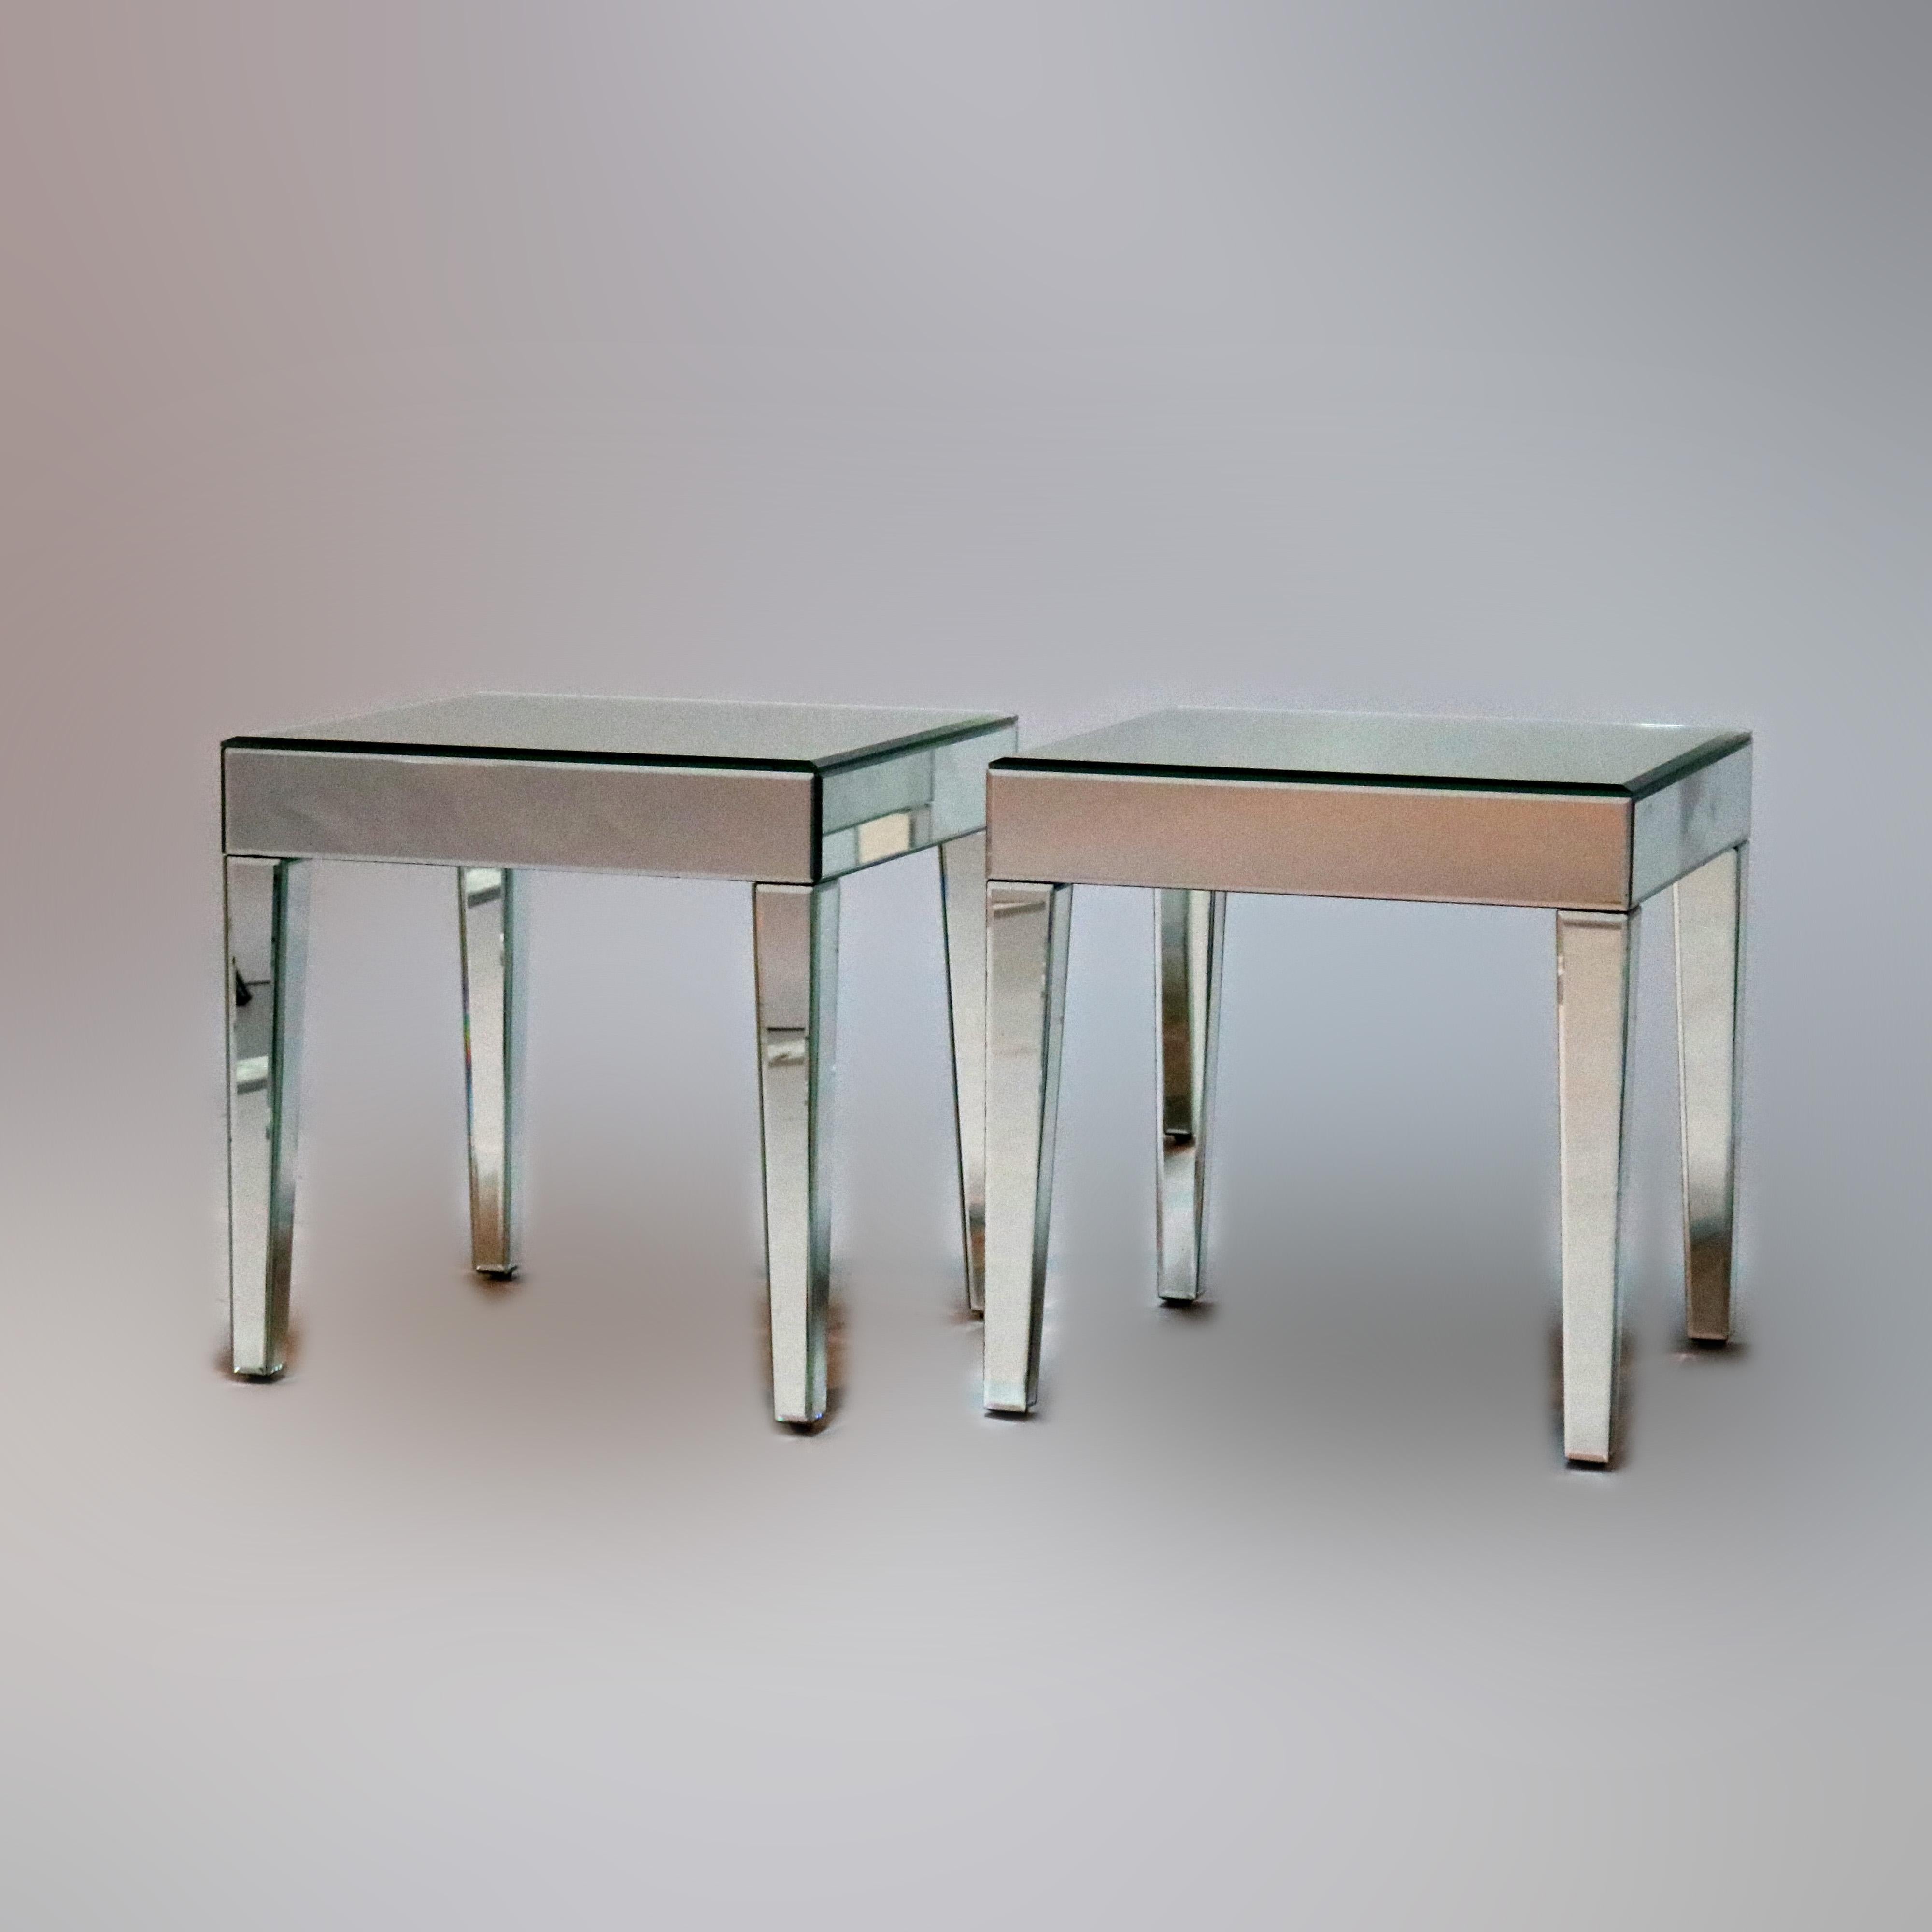 A pair of Mid-Century Modern side tables offer mirrored construction raised on tapered straight legs, circa 1960

Measures: 19.25